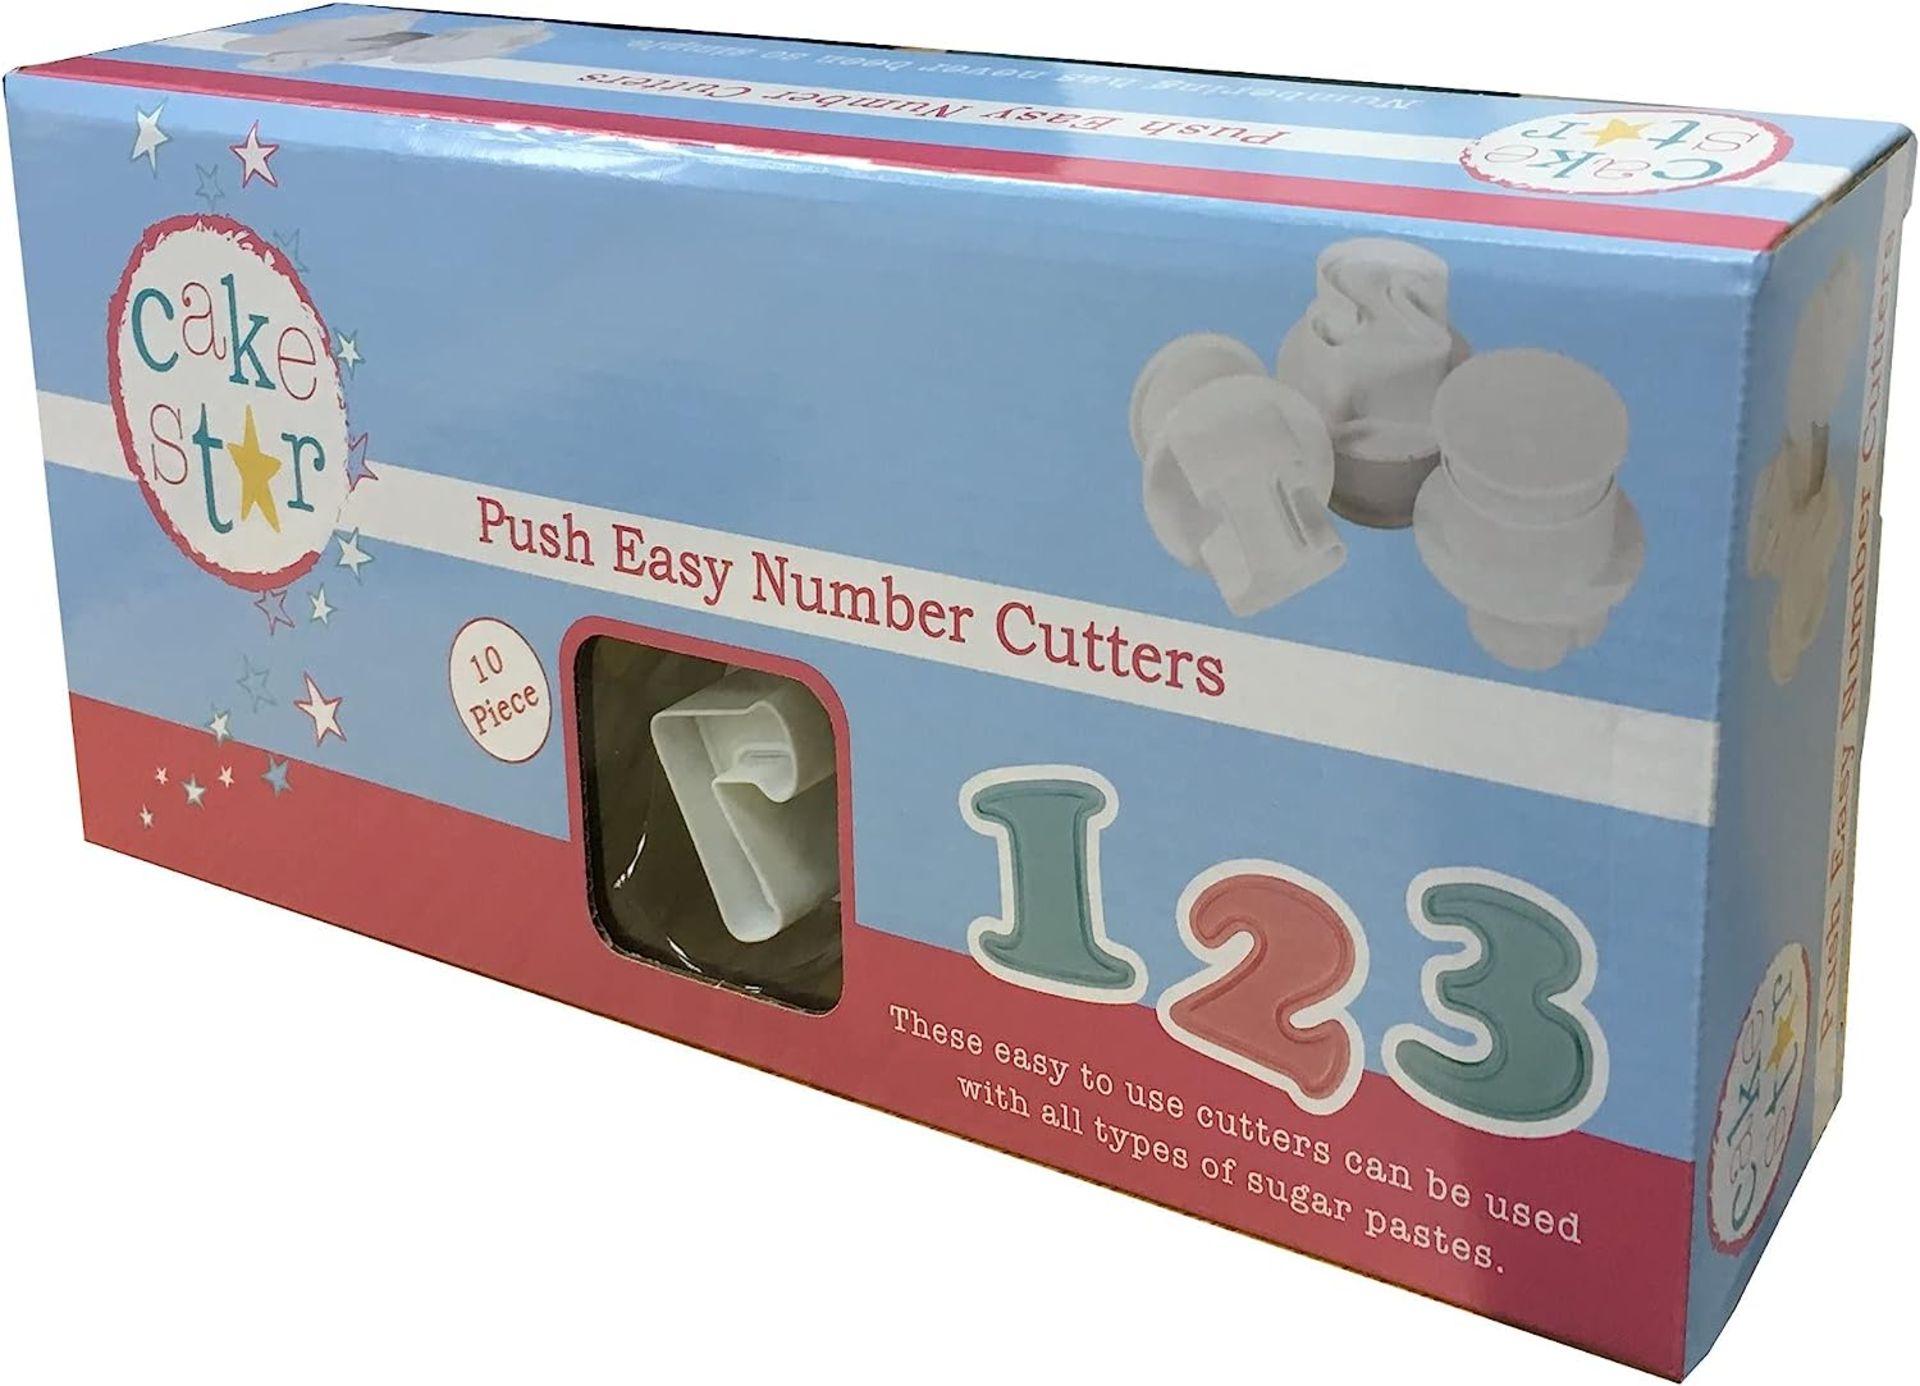 PALLET OF 500 NEW CAKE STAR PUSH EASY NUMBER CUTTERS - 10 PIECES - RRP £4500 - Image 3 of 4